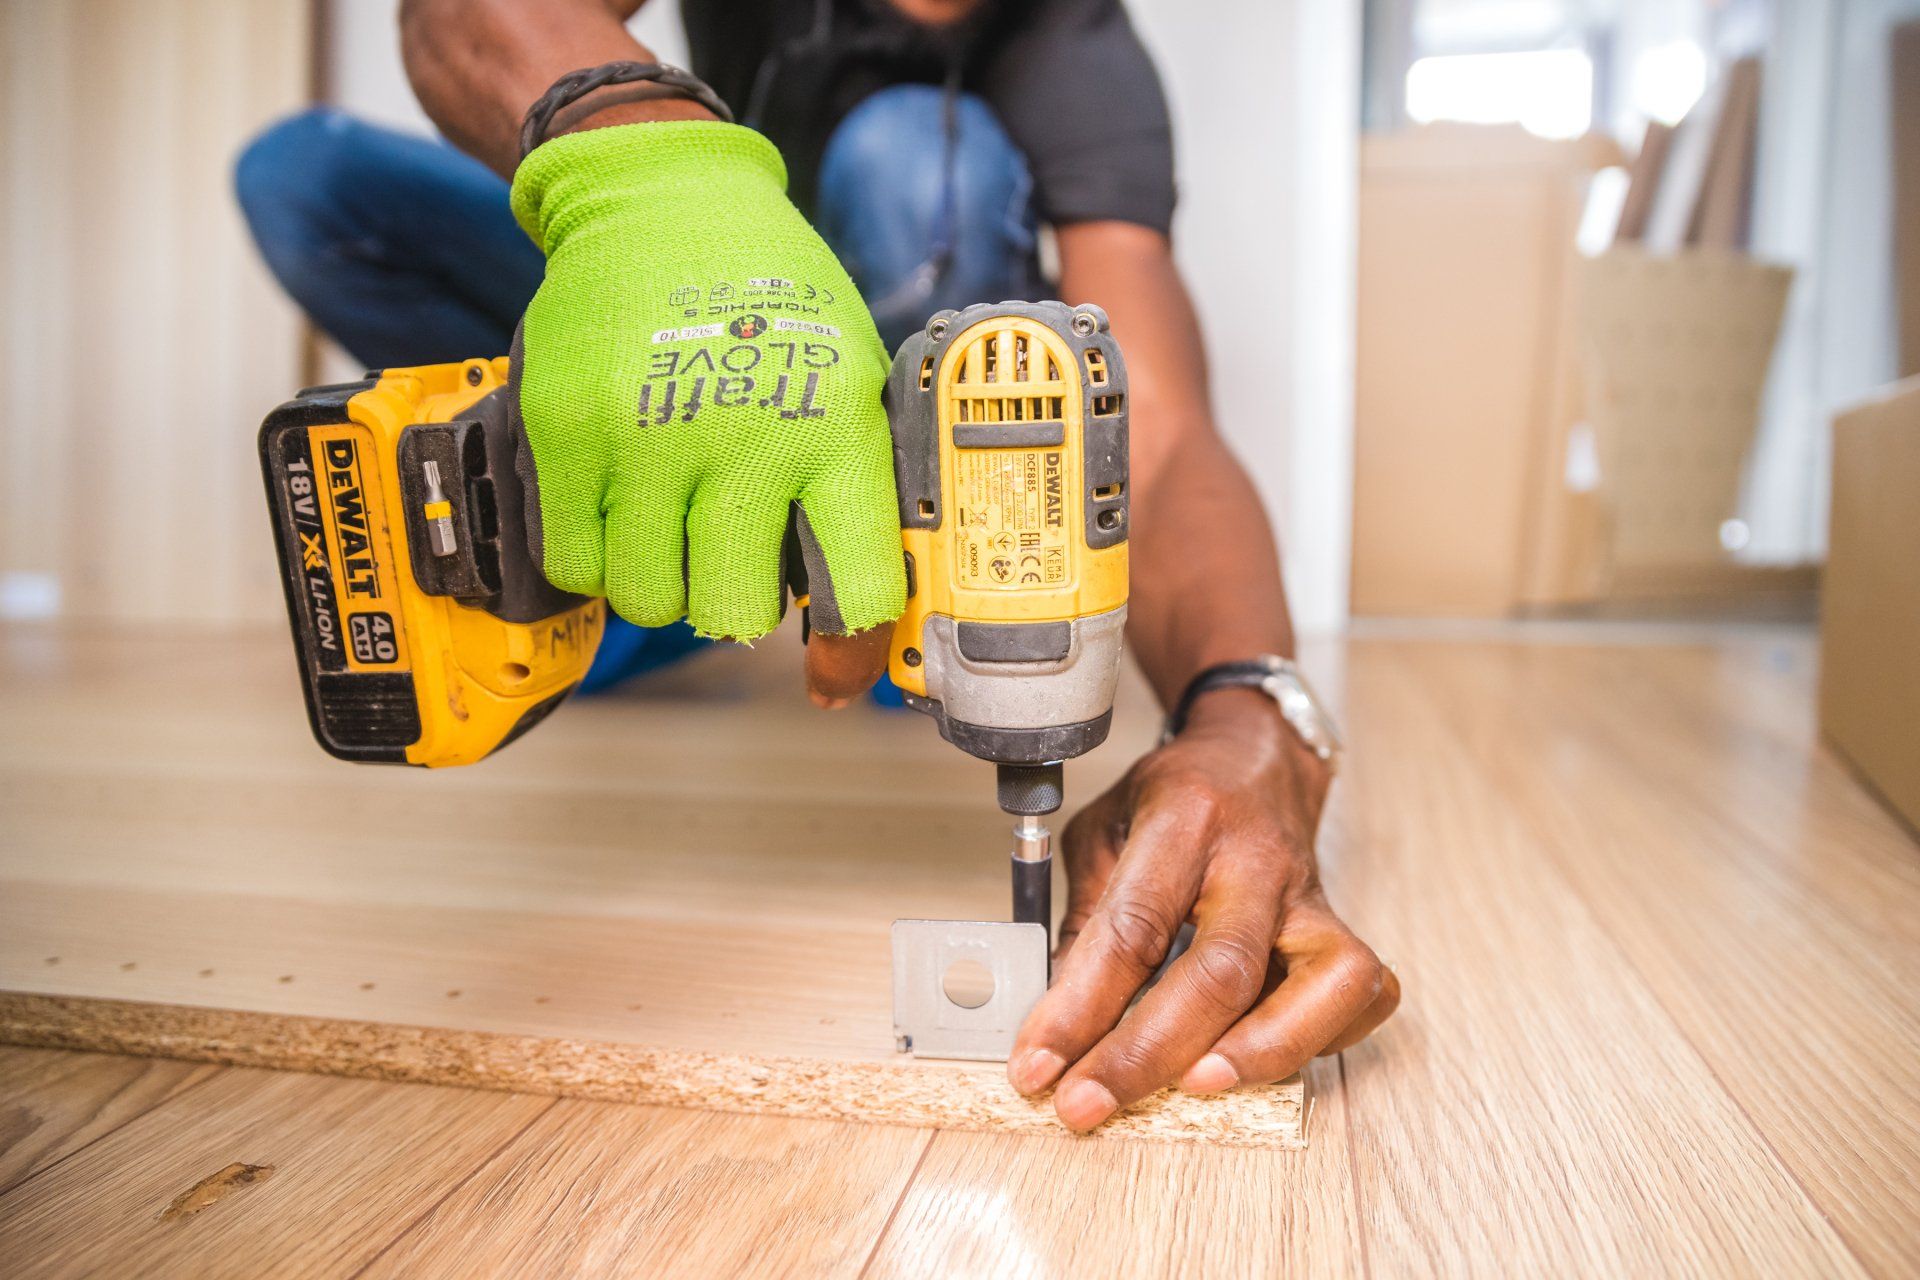 A man is using a drill to drill a hole in a piece of wood.